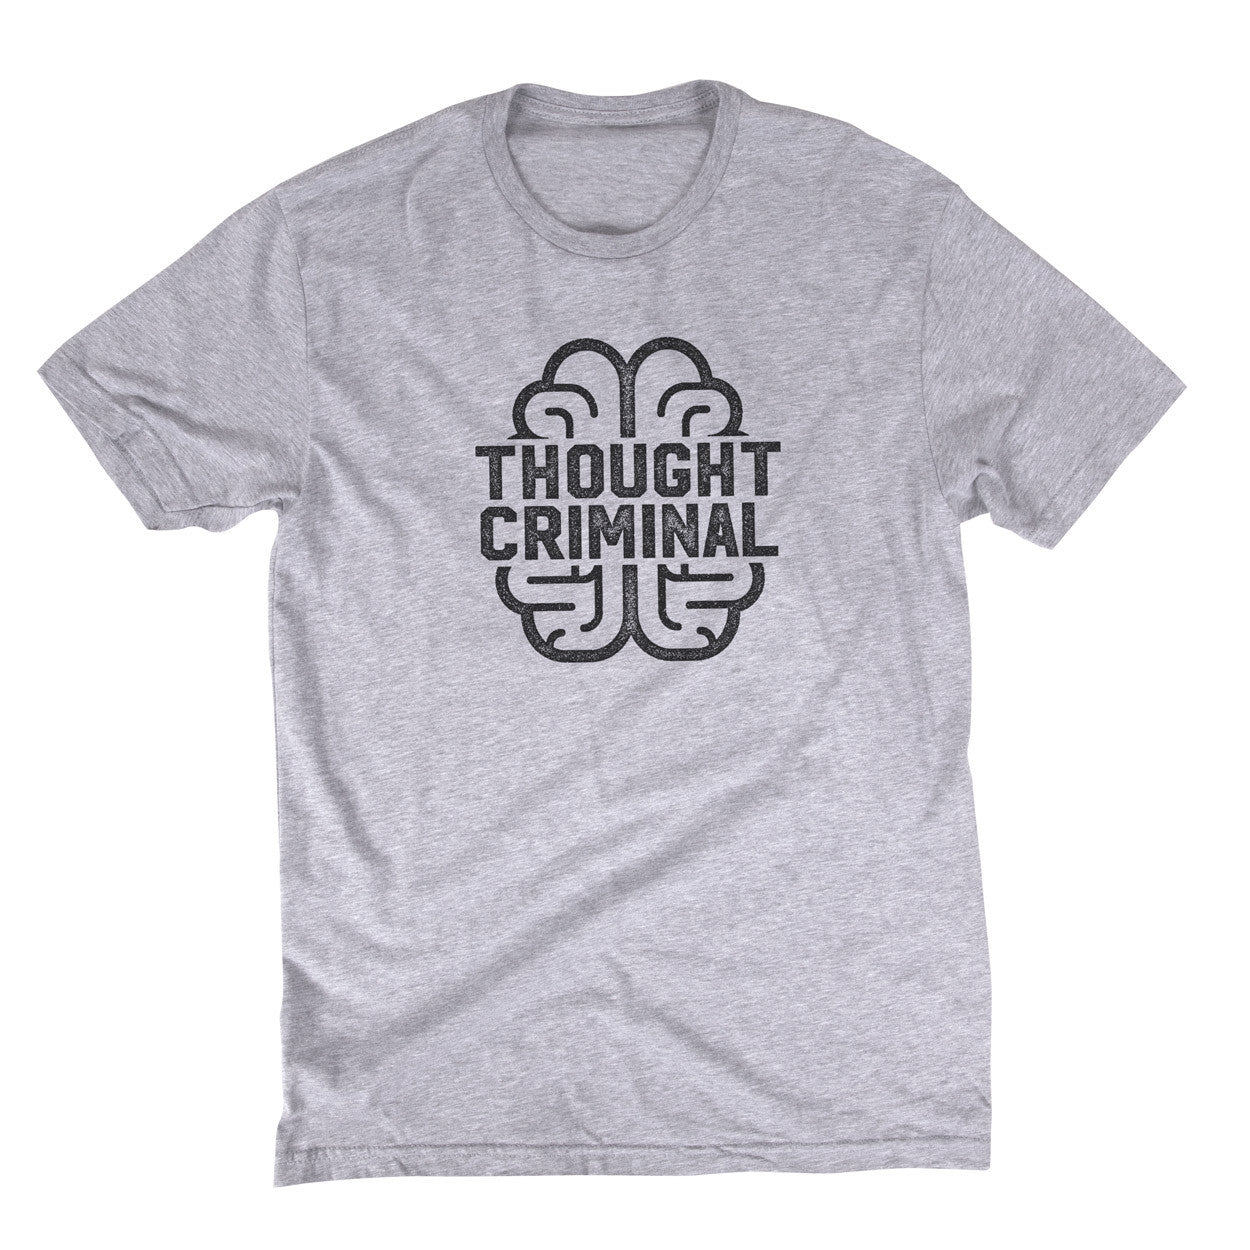 Thought Criminal By Liberty Maniacs in Athletic Grey